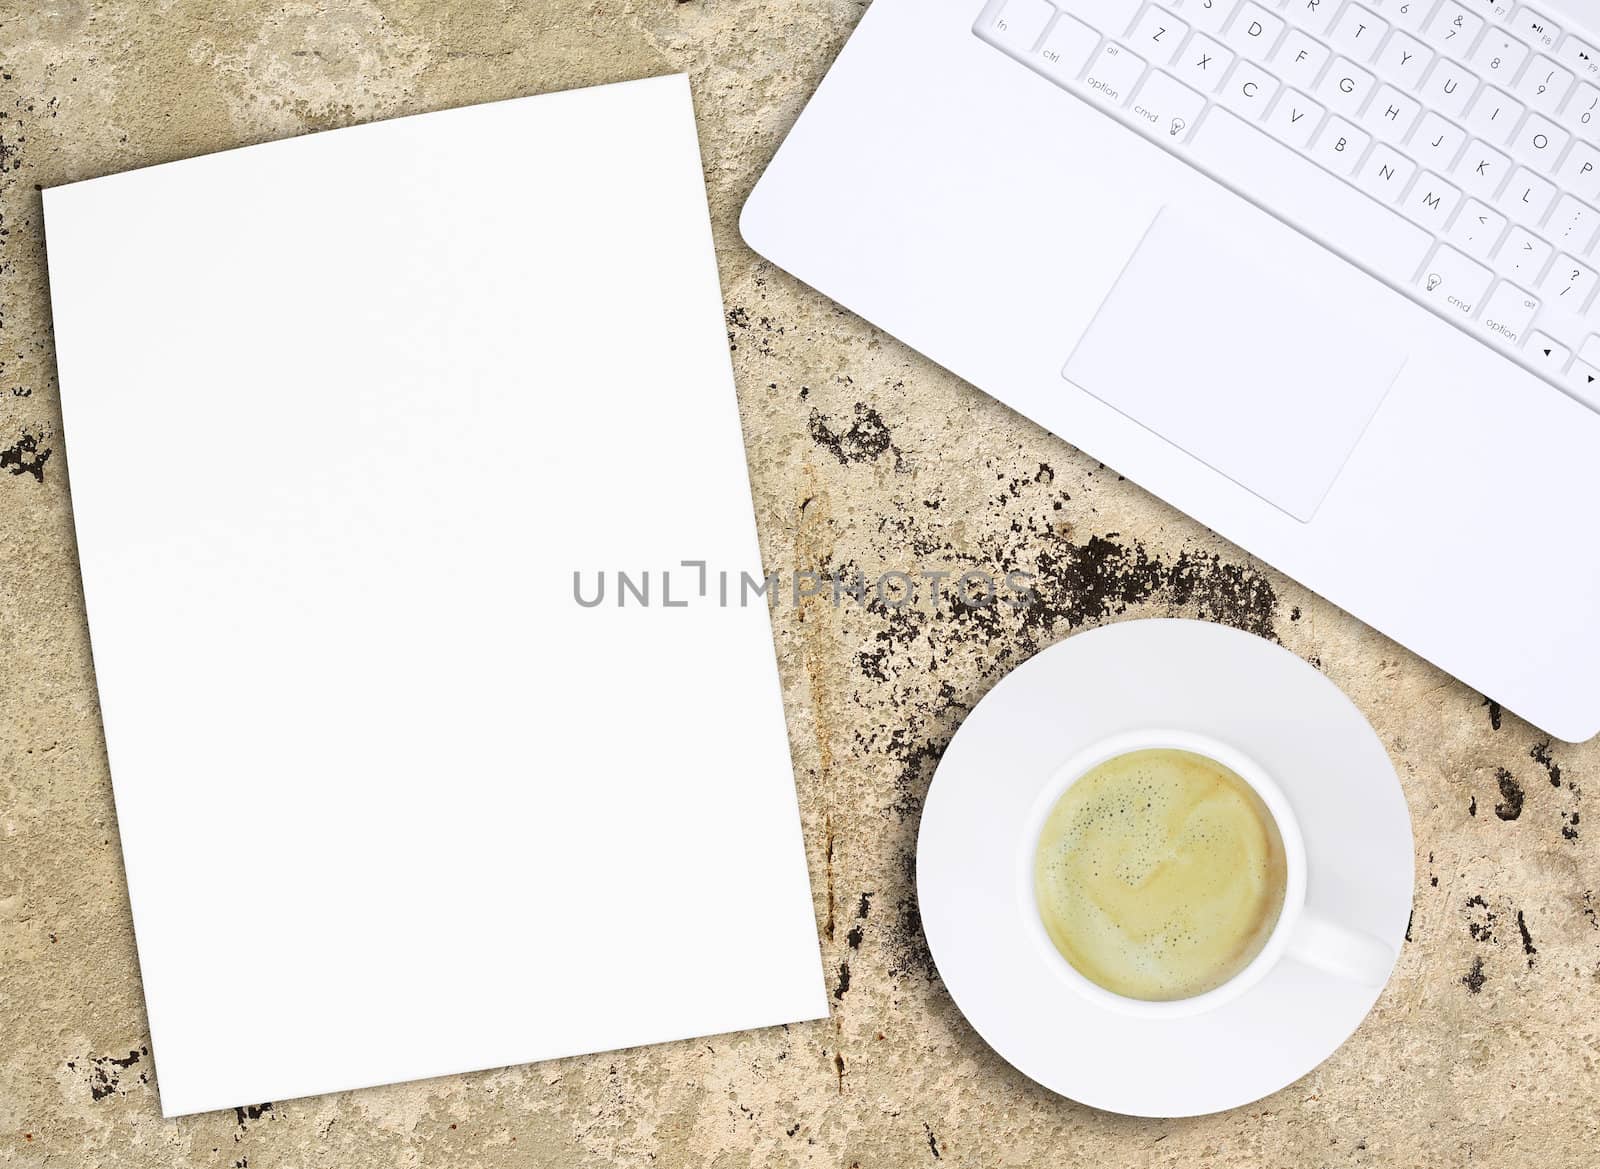 Laptop and coffee cup on old concrete surface. Computer technology concept